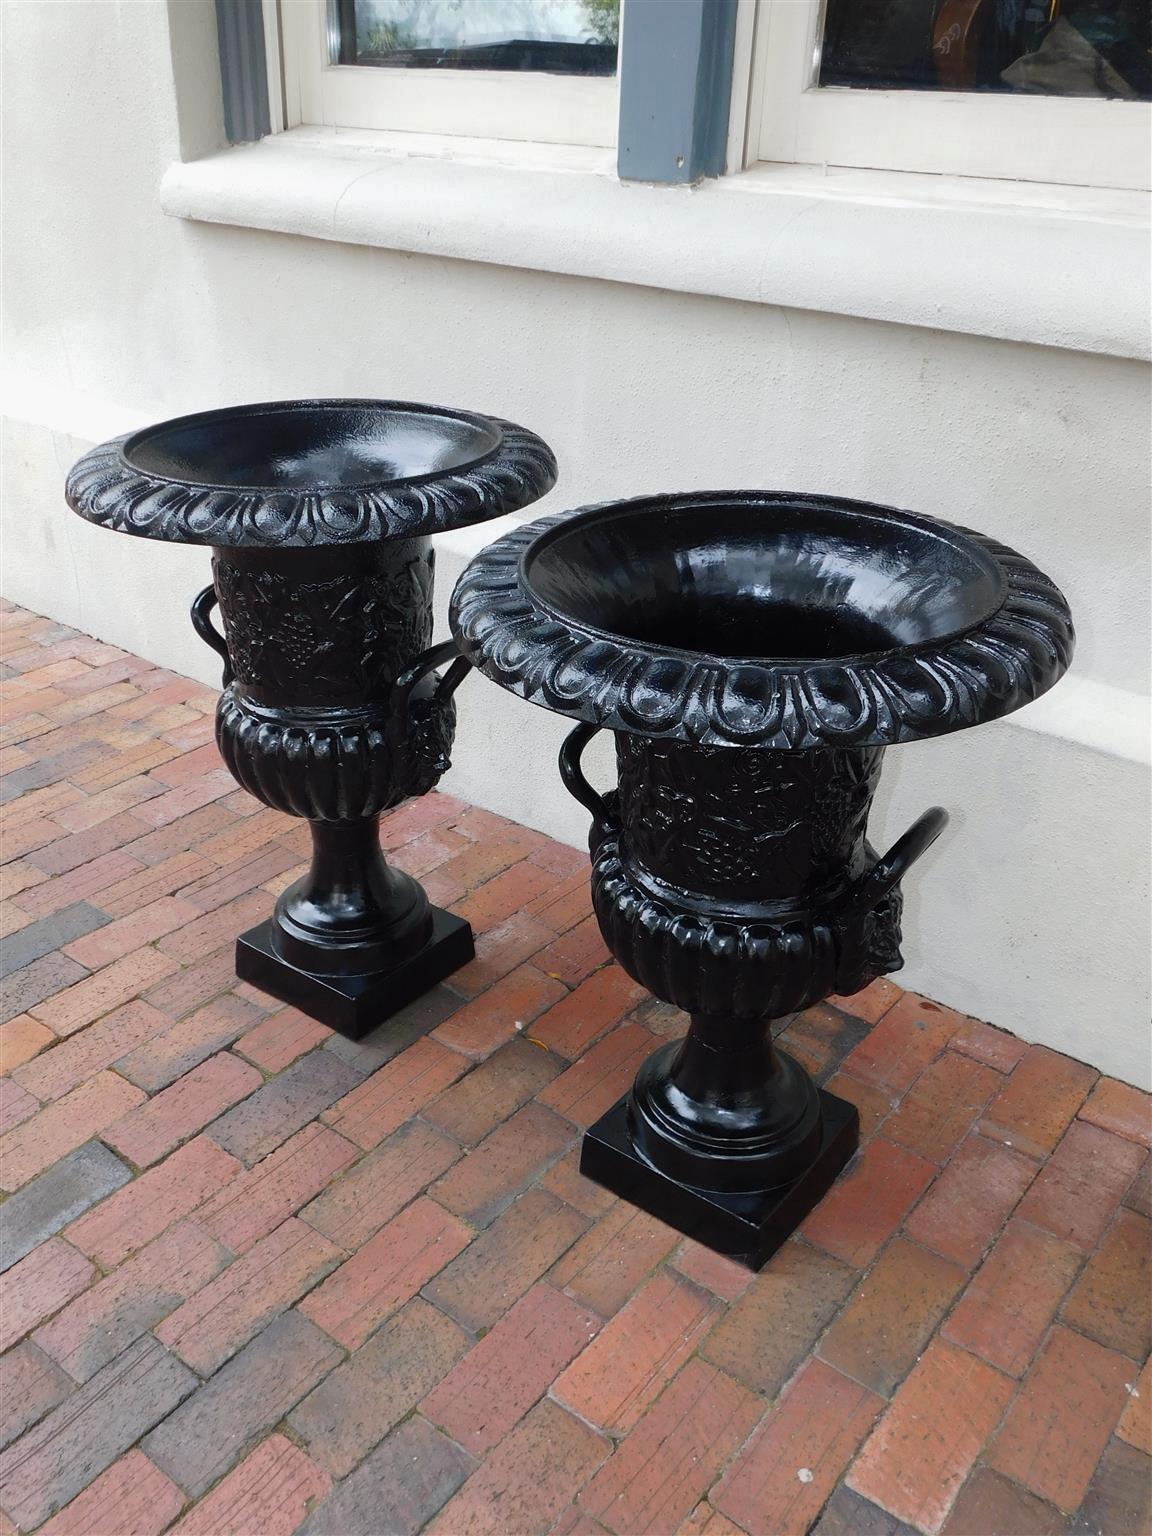 Mid-19th Century Pair of English Cast Iron and Powered Coated Campana-Form Garden Urns, C. 1850 For Sale